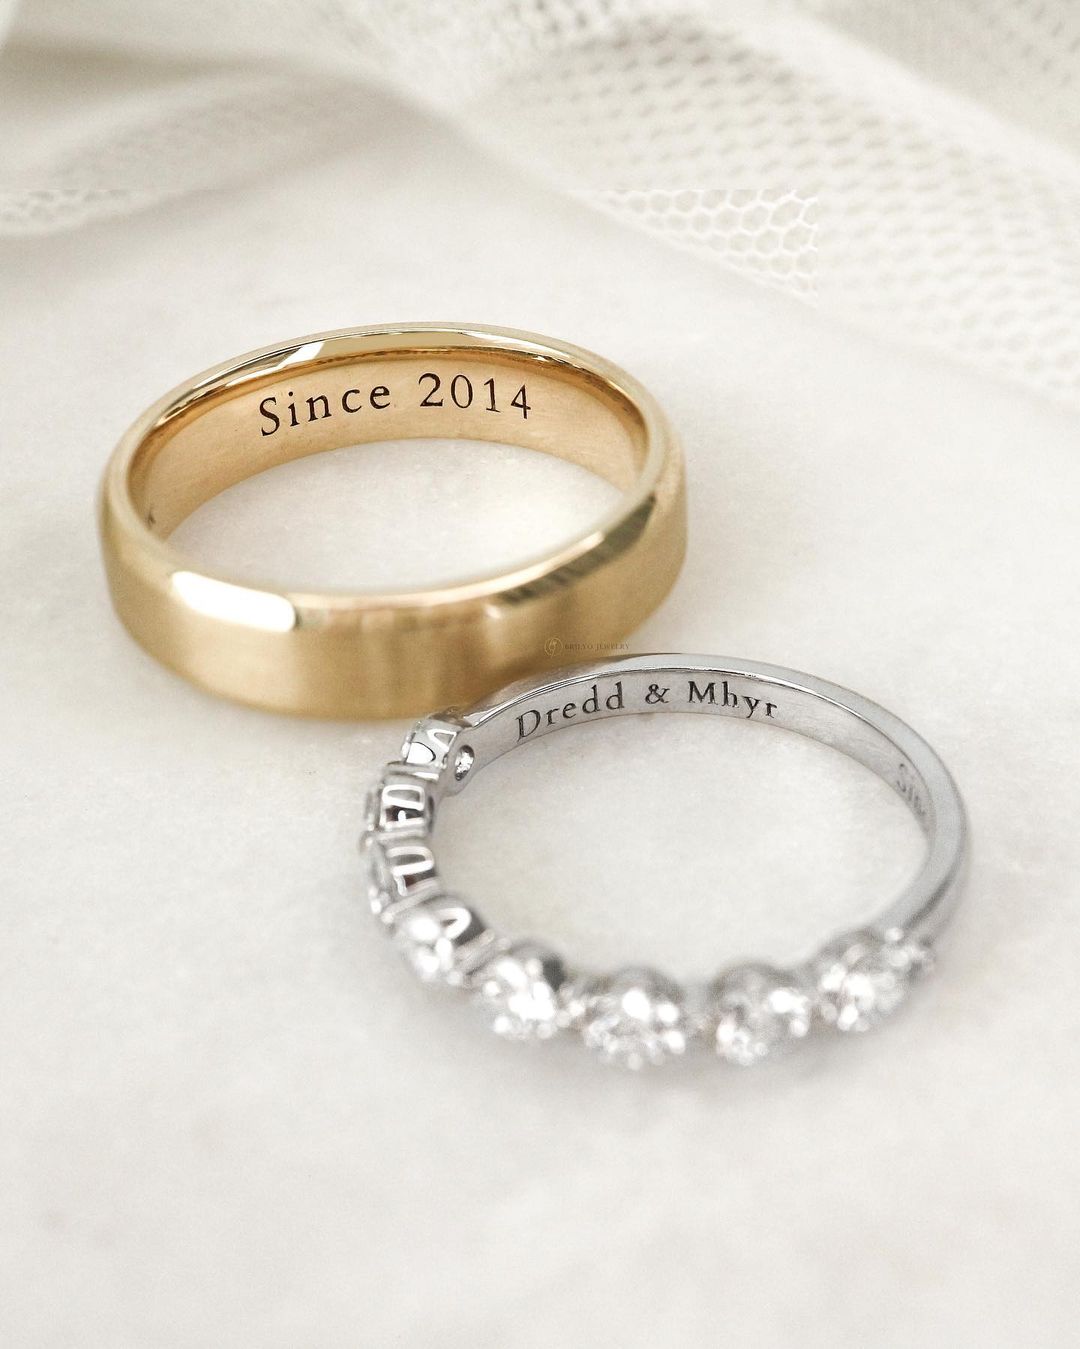 Complementary Wedding Rings